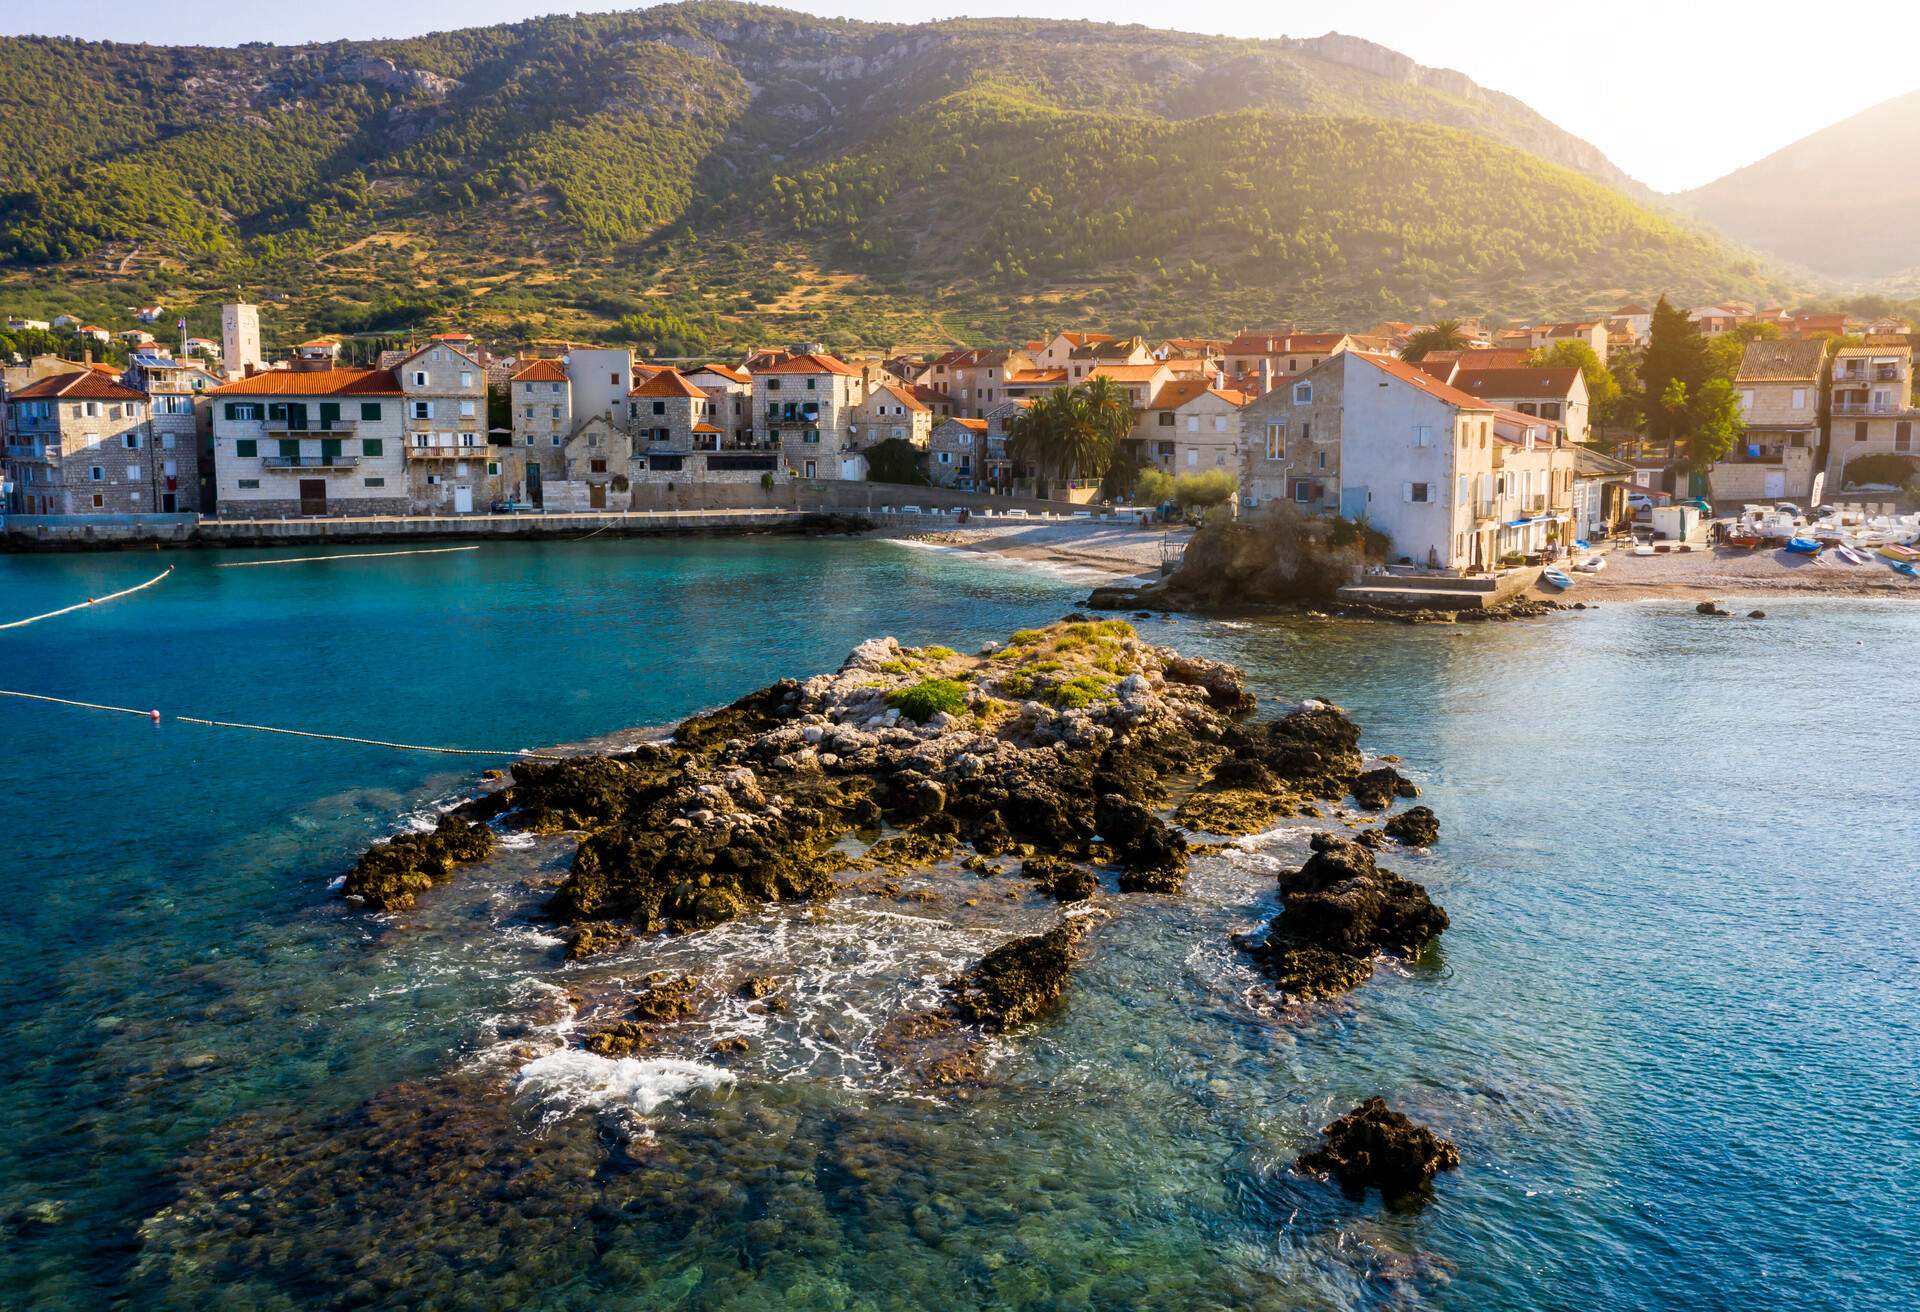 A coastal town lying at the foot of a hill surrounded by clear turquoise waters.